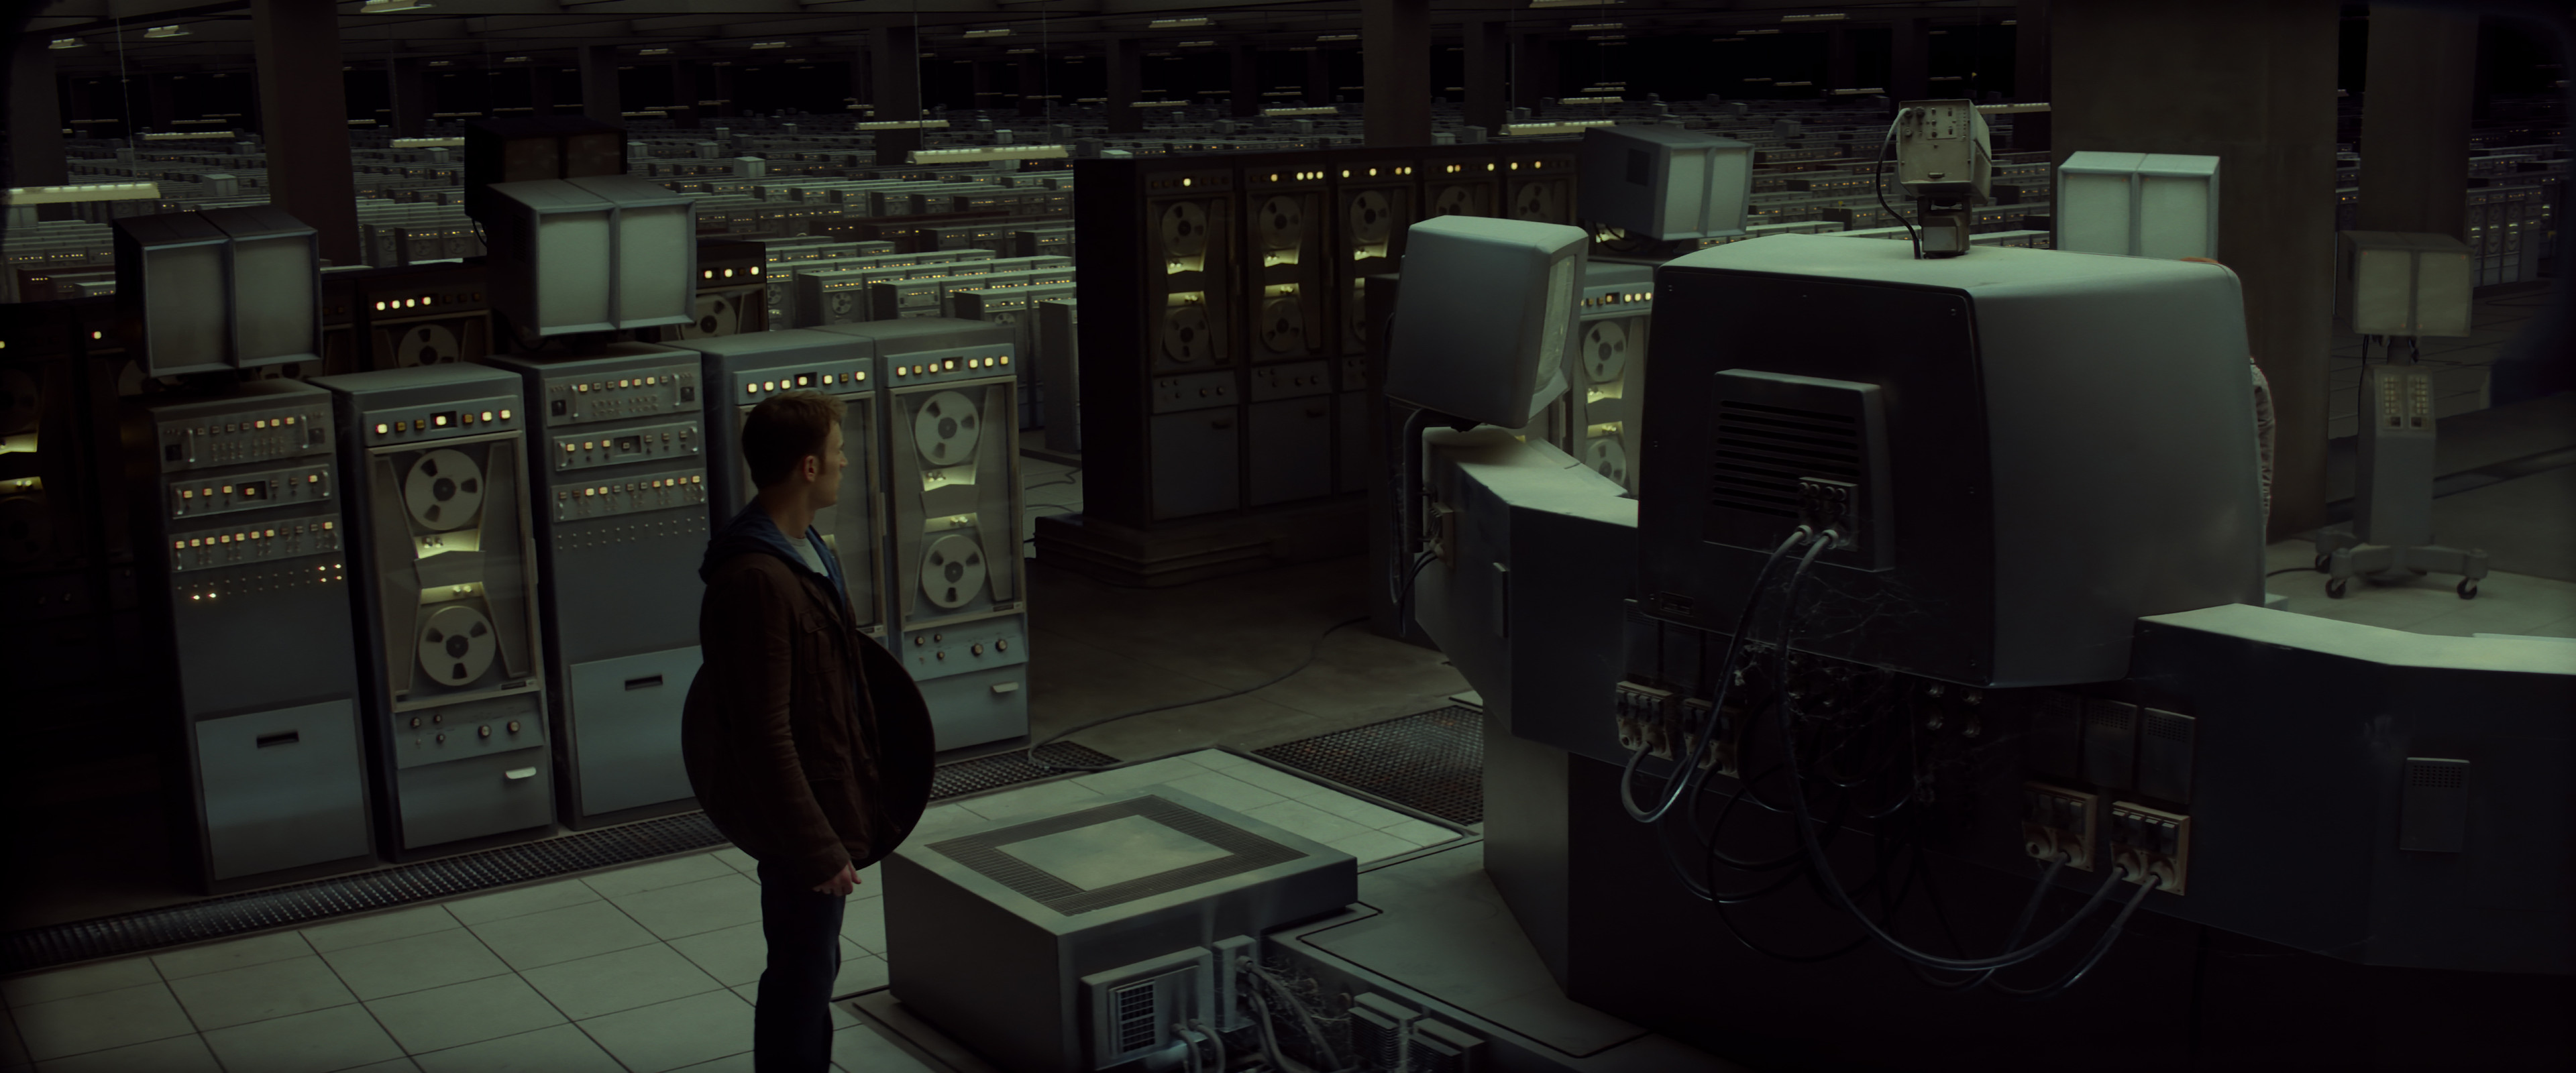 Extension of the live action plate (which includes characters and foreground) with never-ending rows of ancient computers, which form the digital brain of the deceased Doctor Zola.